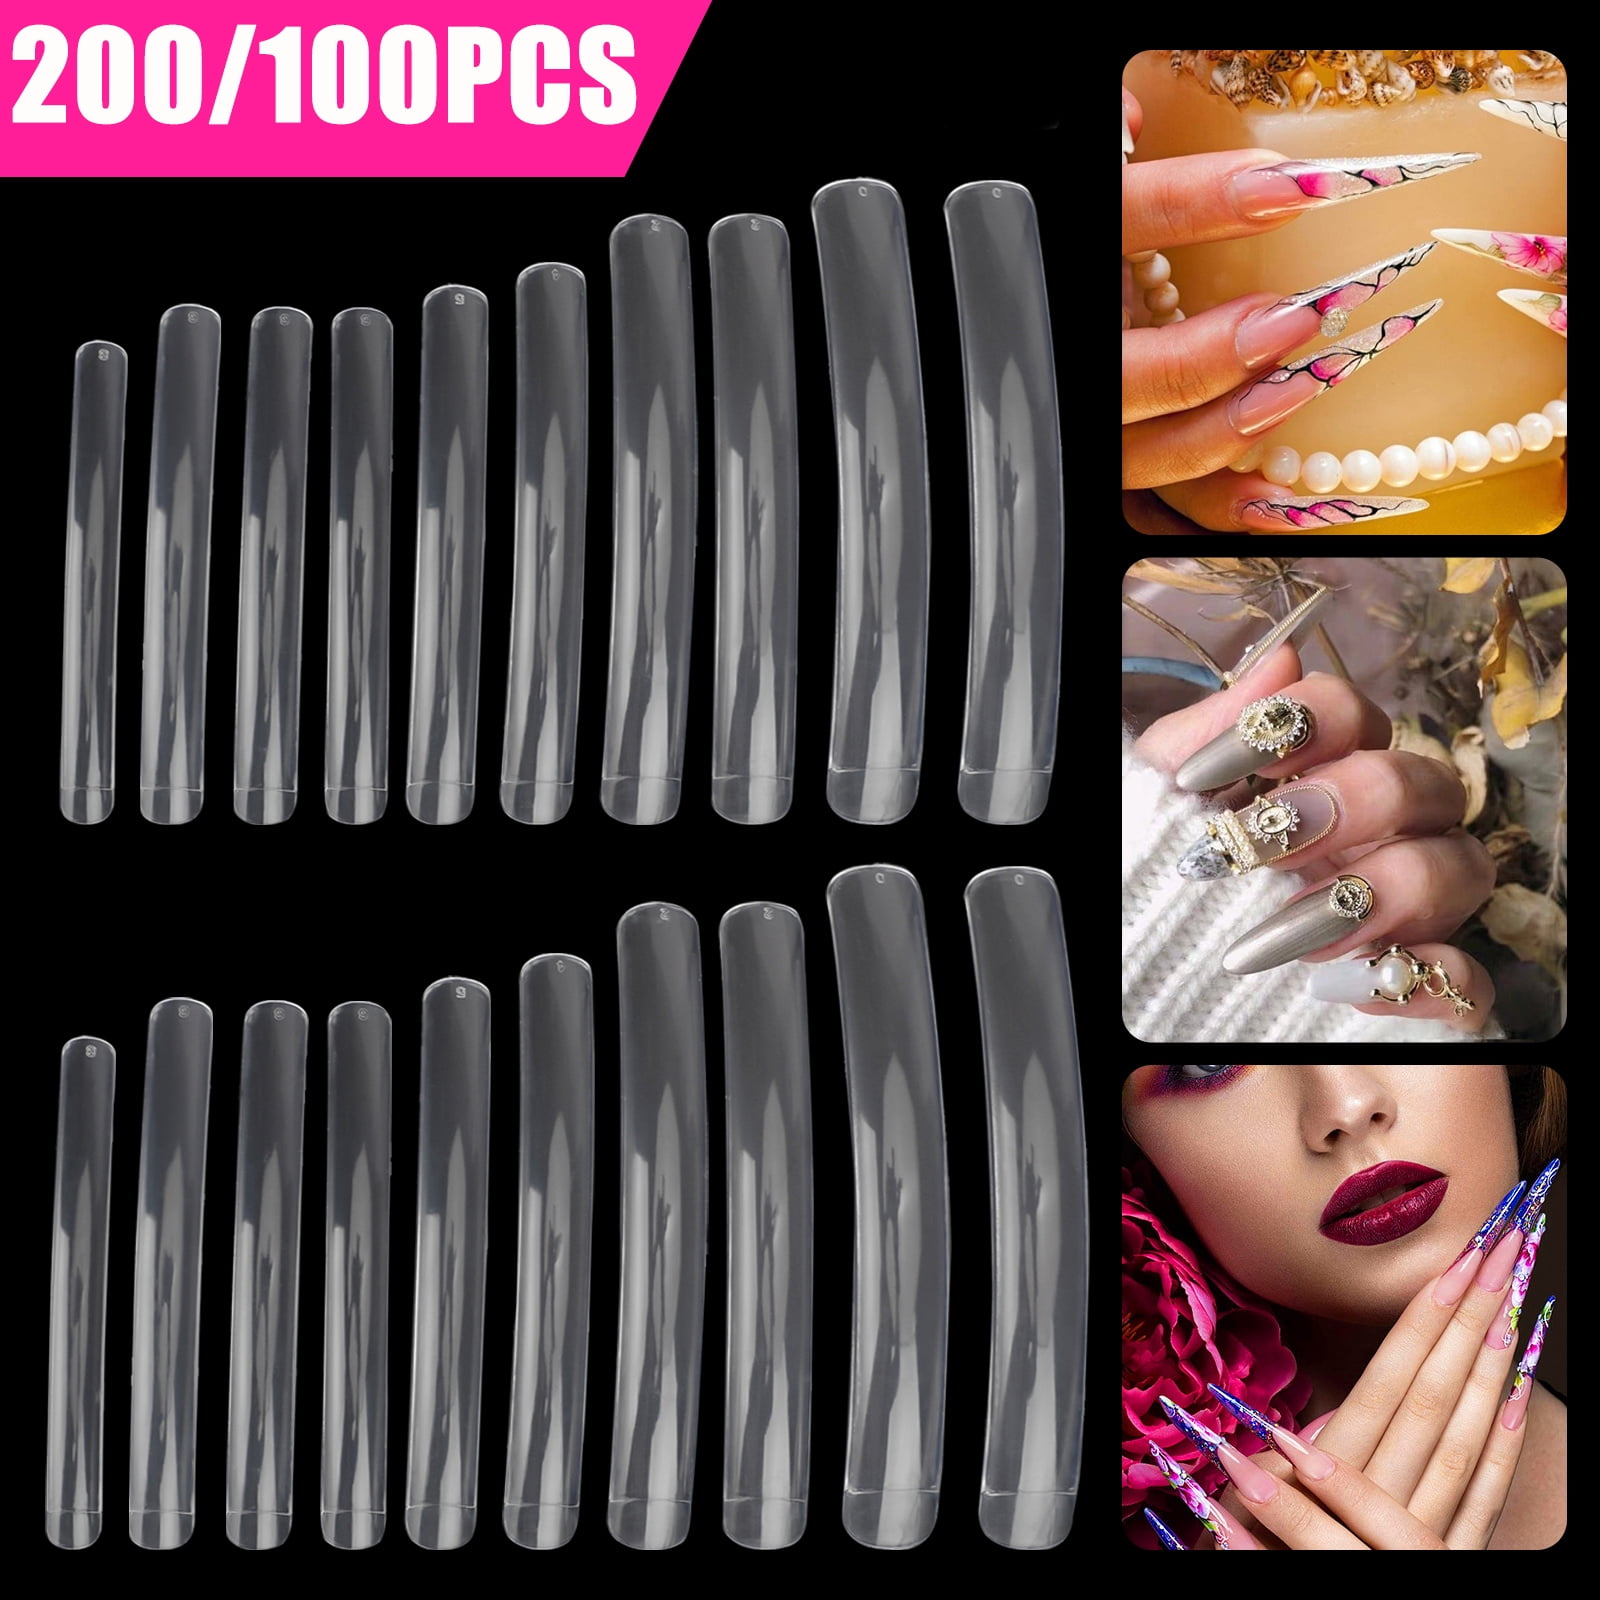 240 0 1 100 Pcs Extra Long Stiletto False Nails Tsv 12 Sizes Artificial Nails Tips Full Half Cover Art Tips Clear Acrylic Fake Nails For Diy Nail Manicure Nail Salon Square Point Type